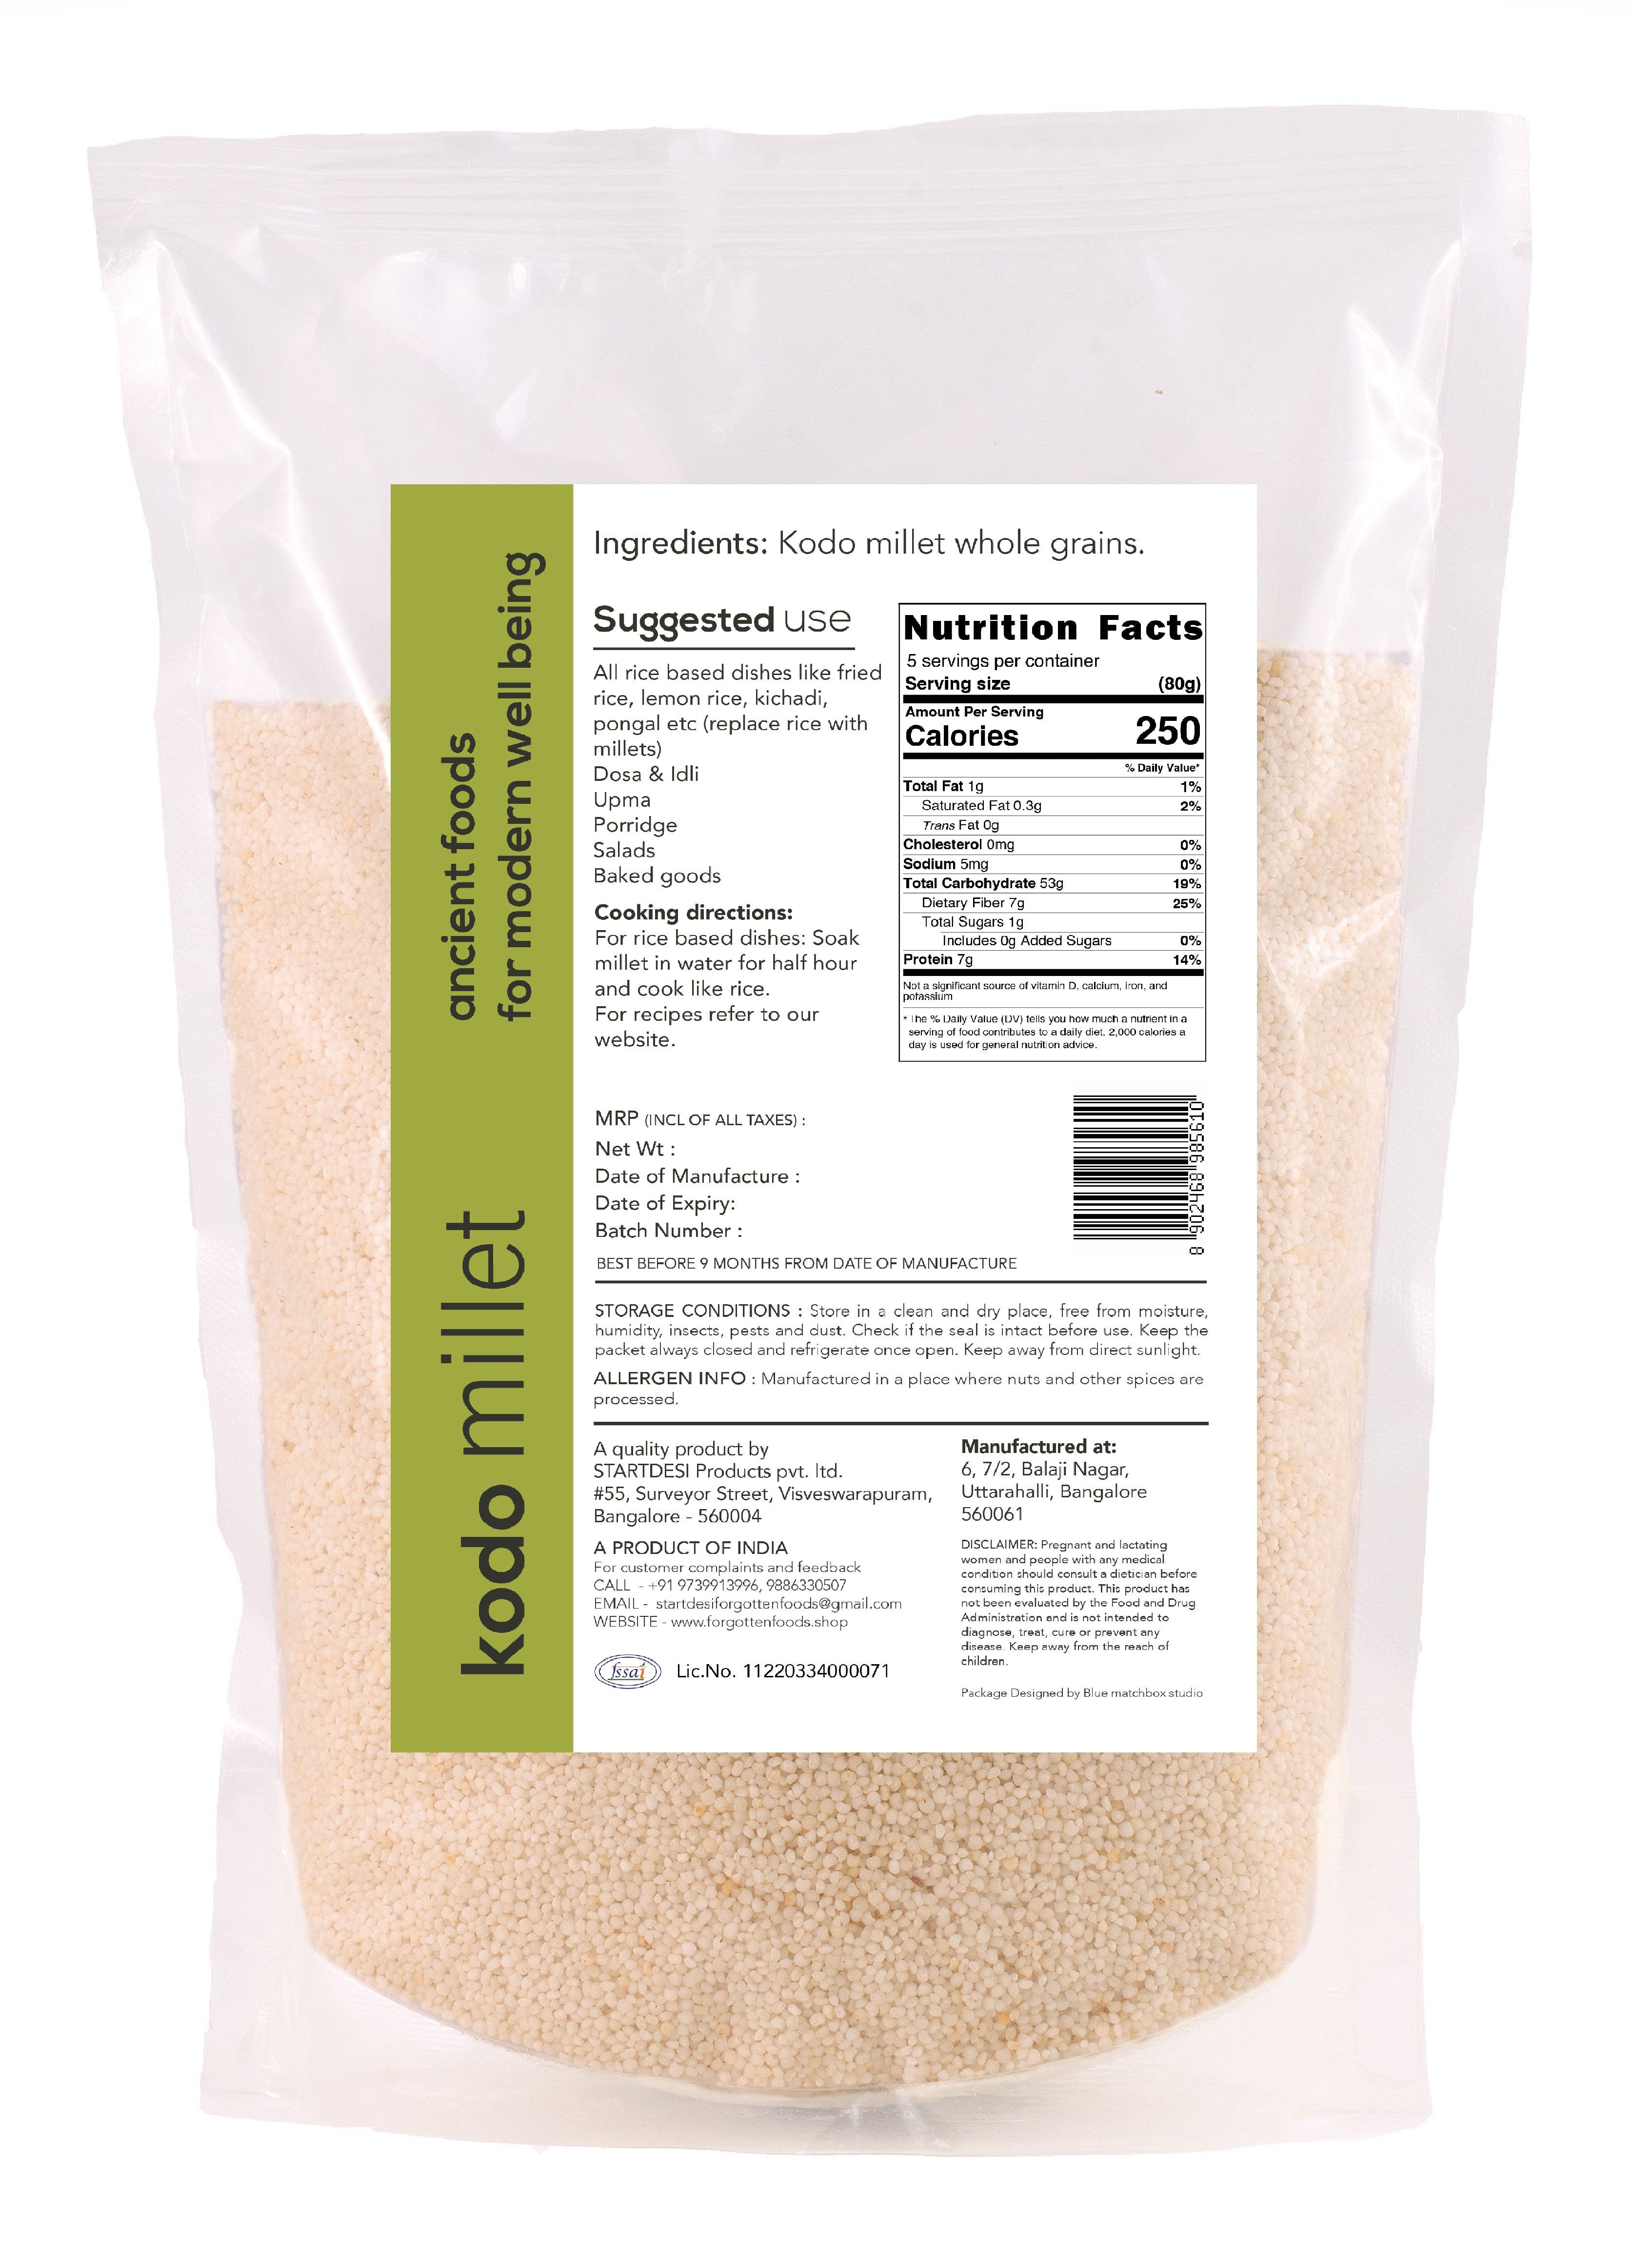 Combo of Millets - Kodo, Foxtail & Little Millet Siridhanya Whole Grains - 900g each